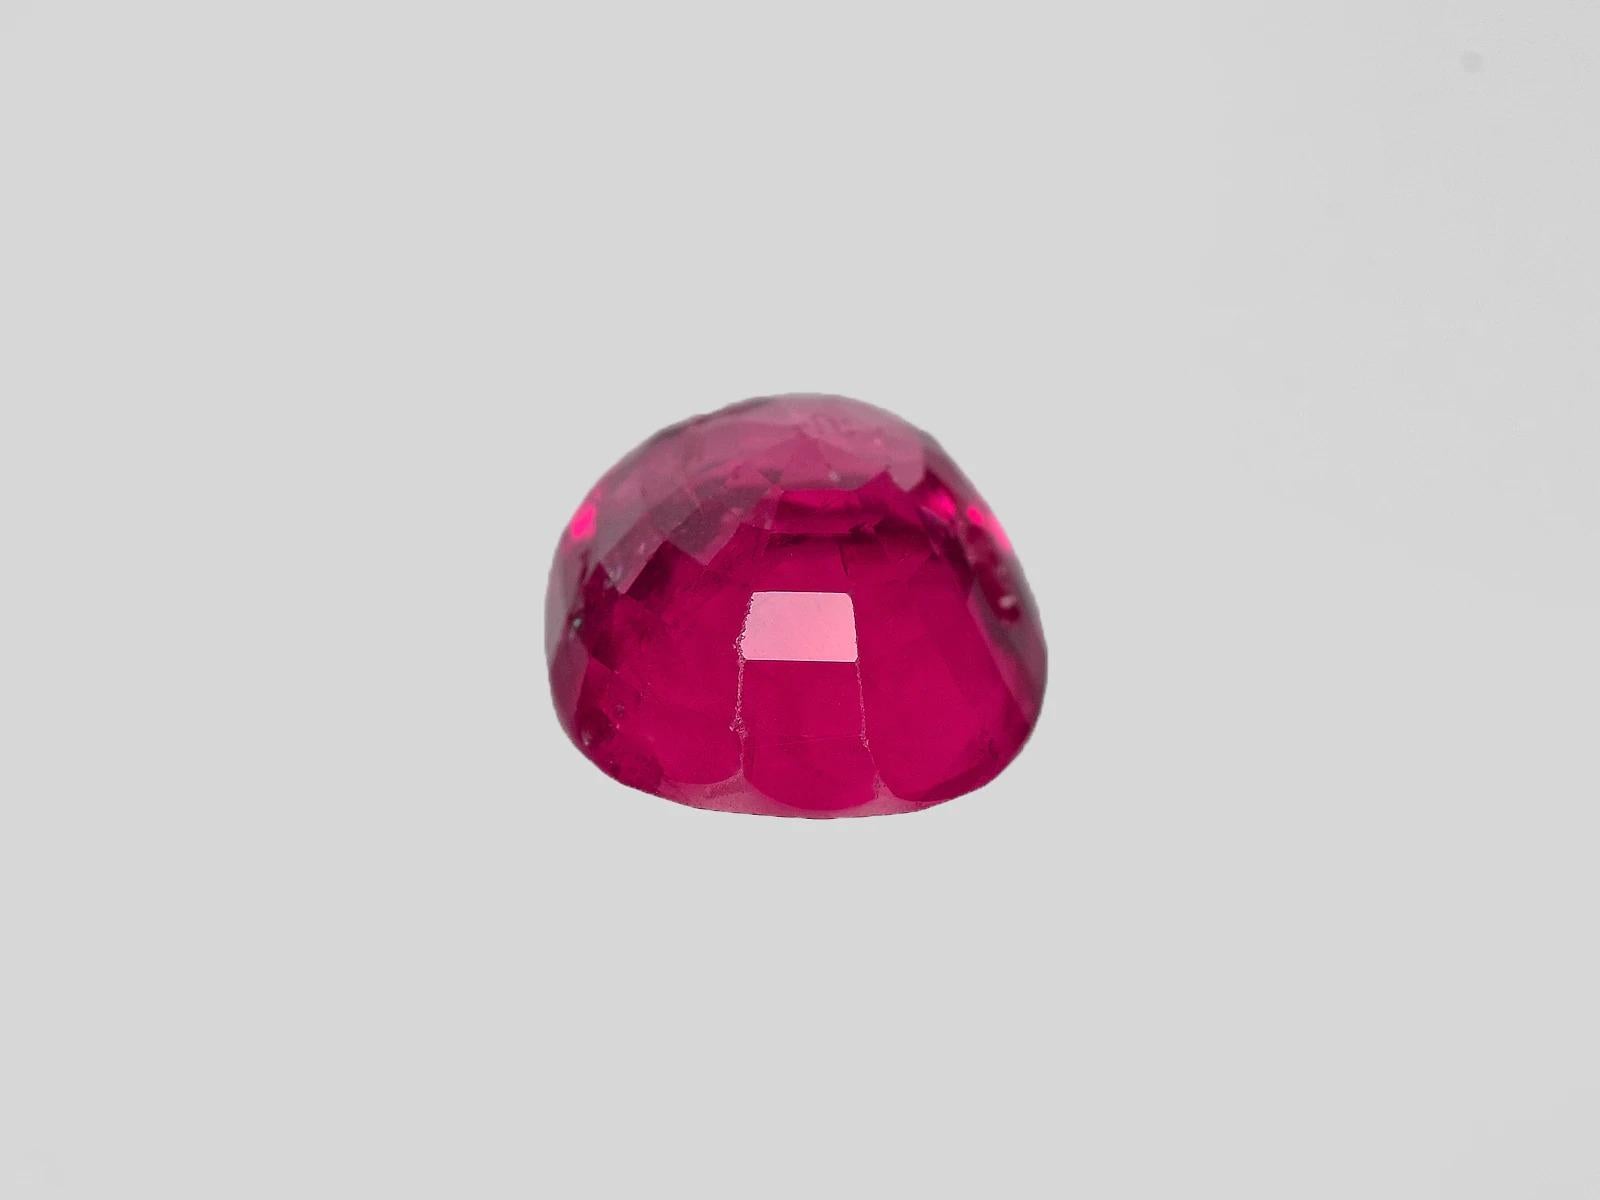 Behold the mesmerizing allure of this unblemished treasure—a breathtaking 3-carat Oval Ruby from Mozambique, untouched by any treatment, cradled within the embrace of solid platinum and 18-carat yellow gold.

Expertly set in a fusion of luxurious